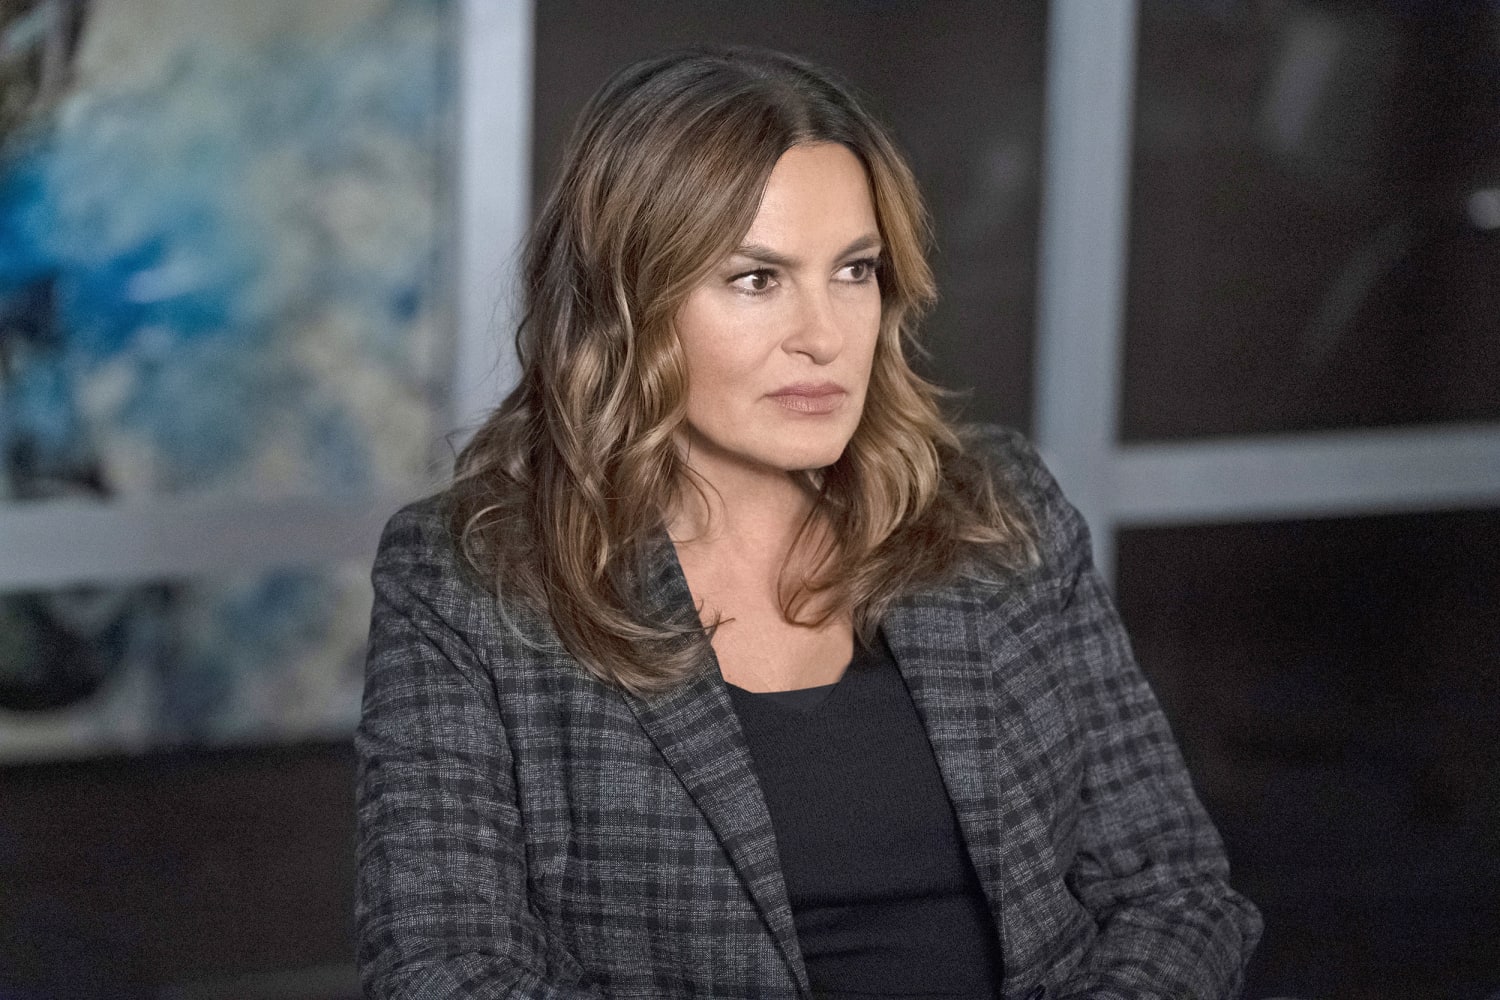 Law & Order: SVU' star Mariska Hargitay shares essay on her experience with sexual assault